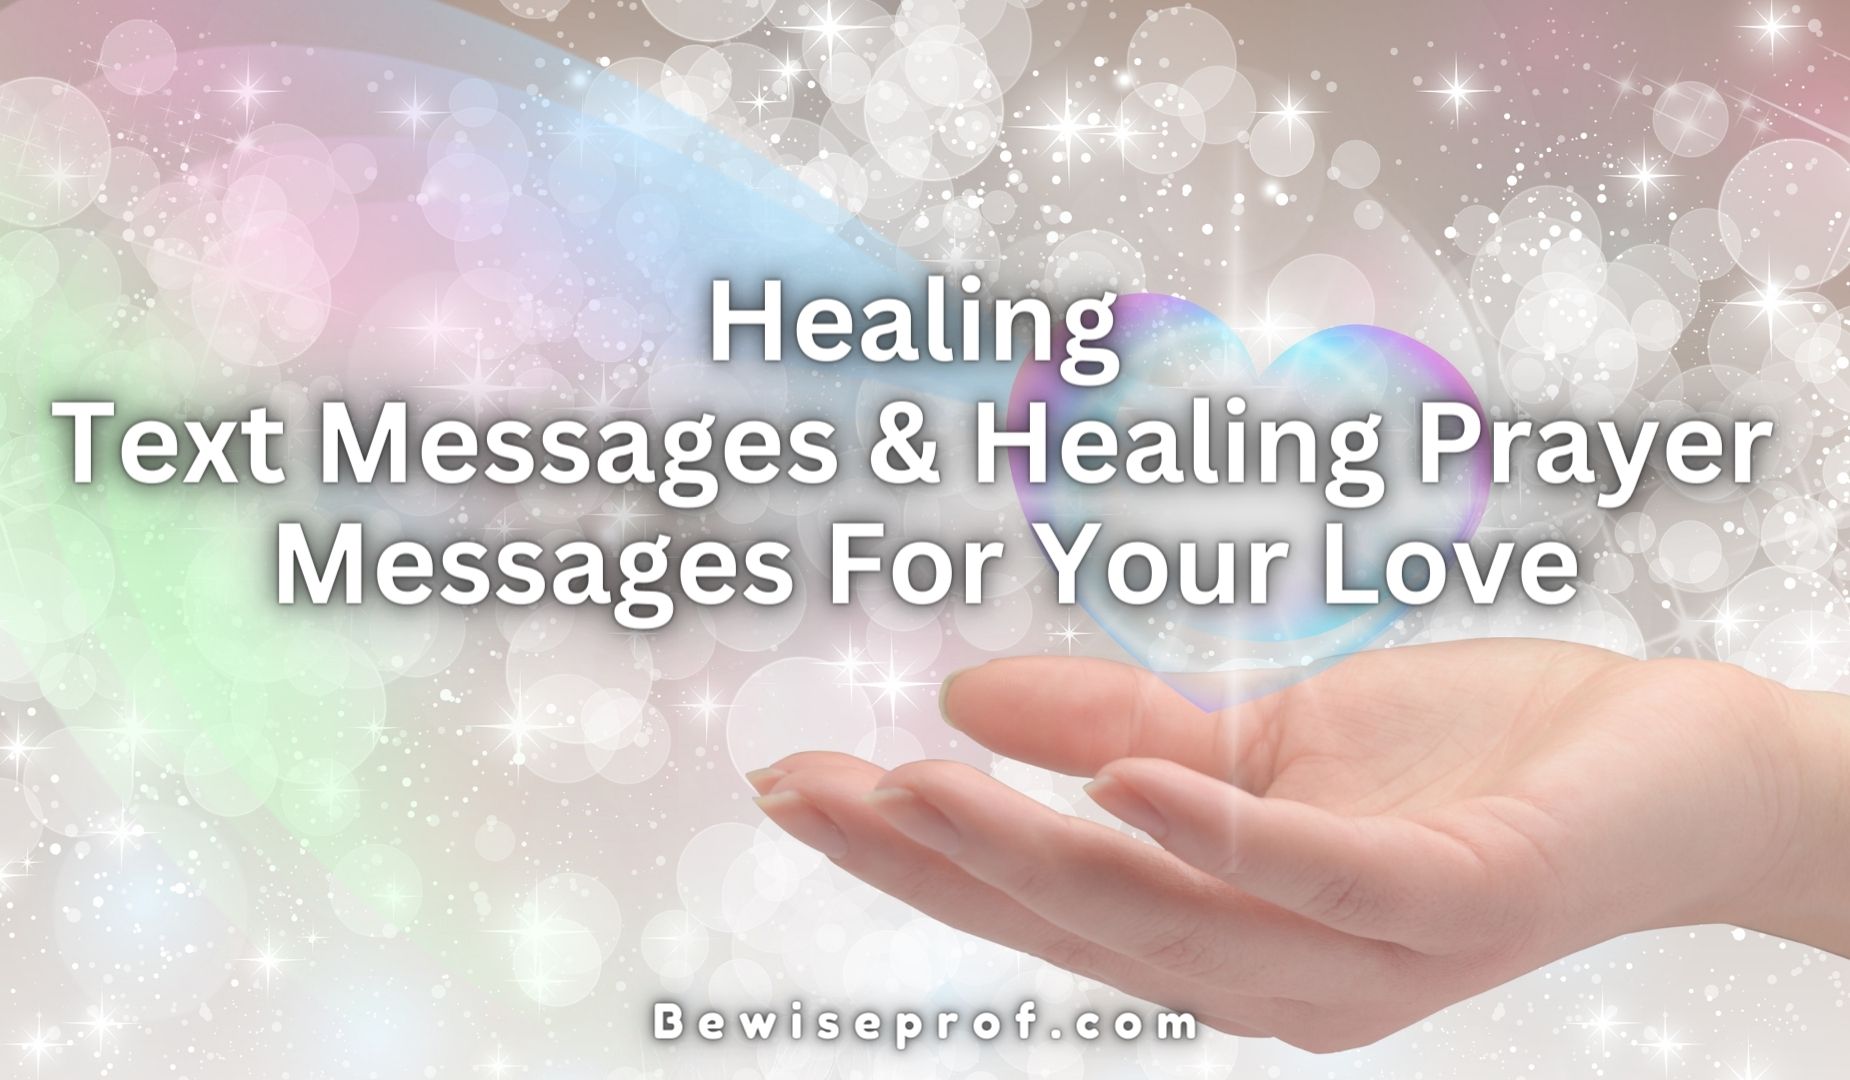 Healing Text Messages & Healing Prayer Messages For Your Love